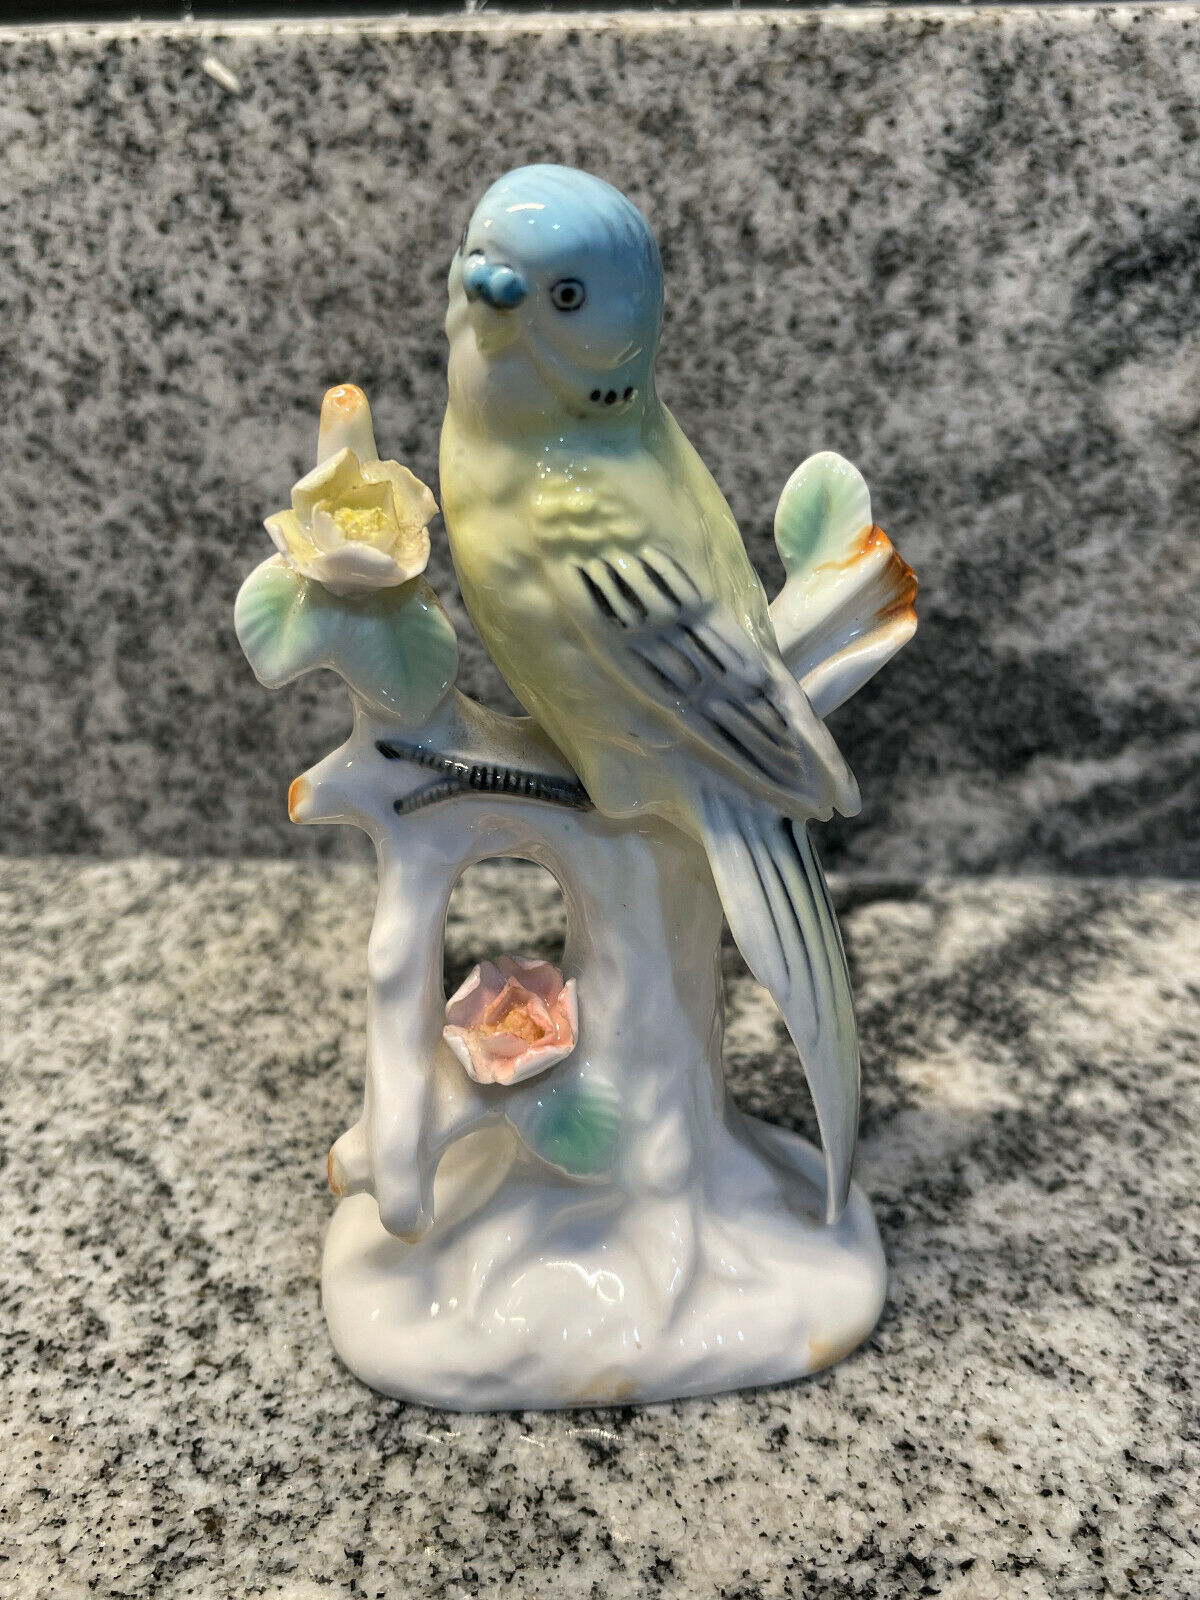 VTG HUMMEL PORCELAIN BLUE BIRD WITH YELLOW AND PINK FLOWERS FIGURINE 5 INCH